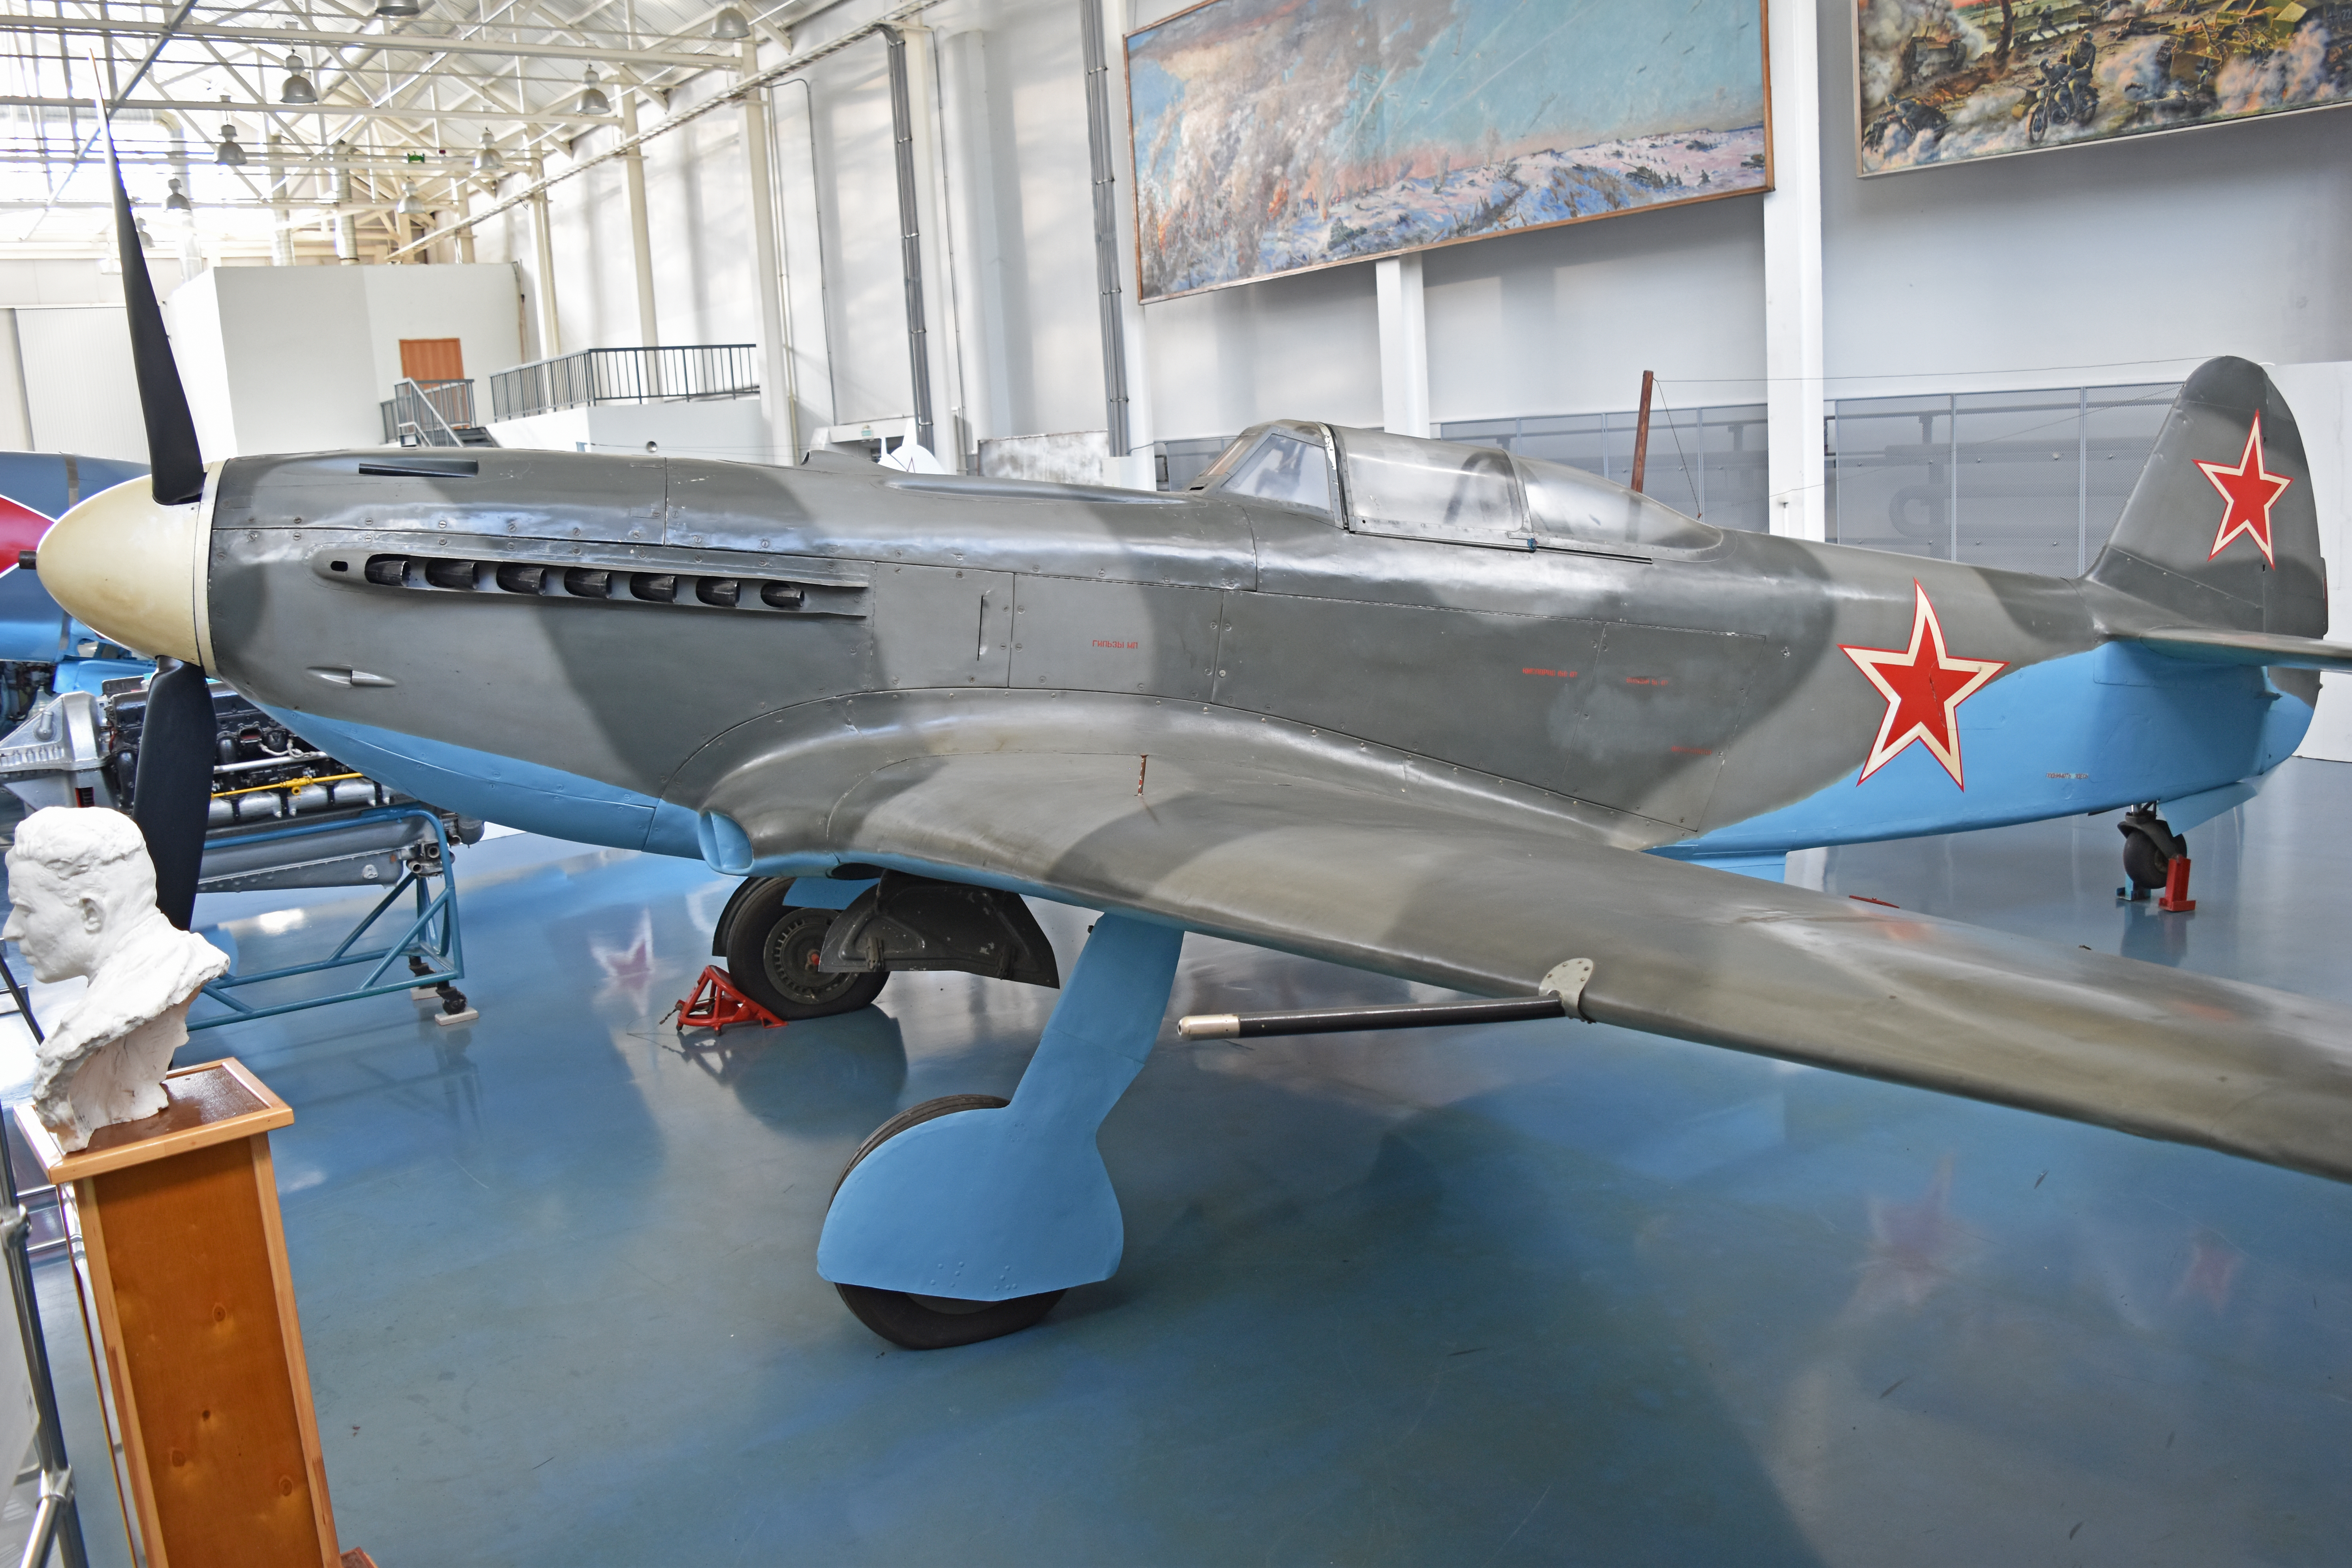 The Yak-9 had multiple upgrades over the course of the war. 